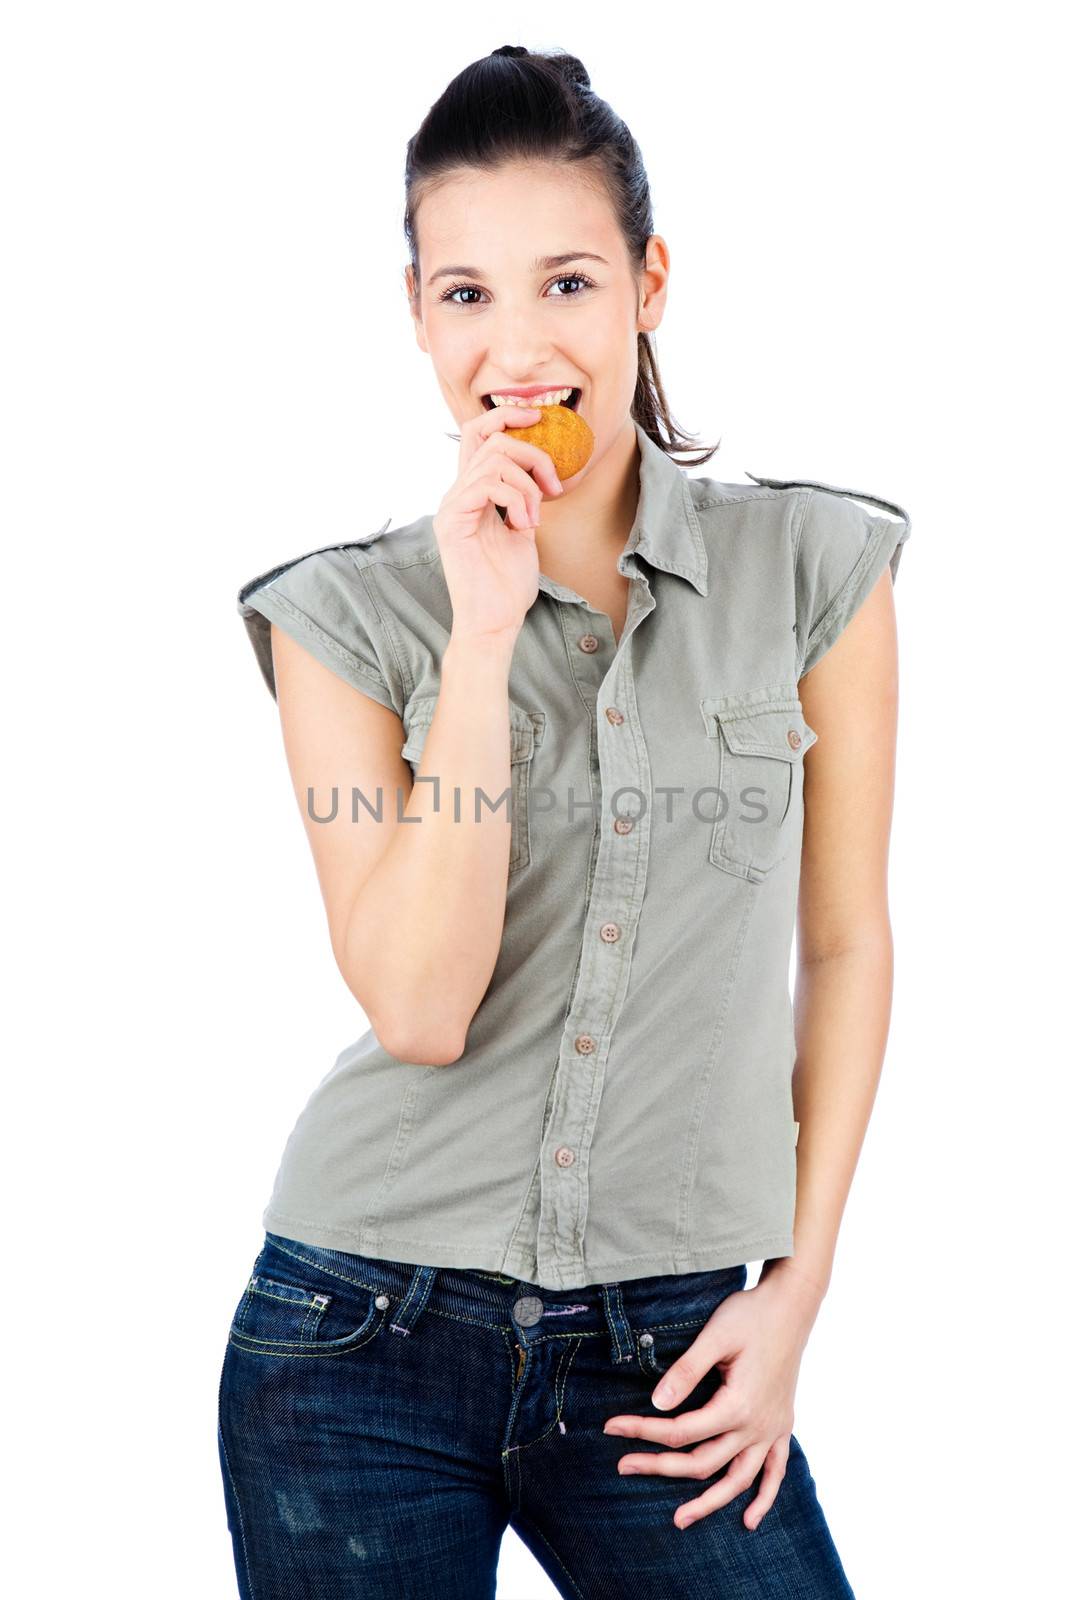 Pretty girl eating cake, isolated on white background